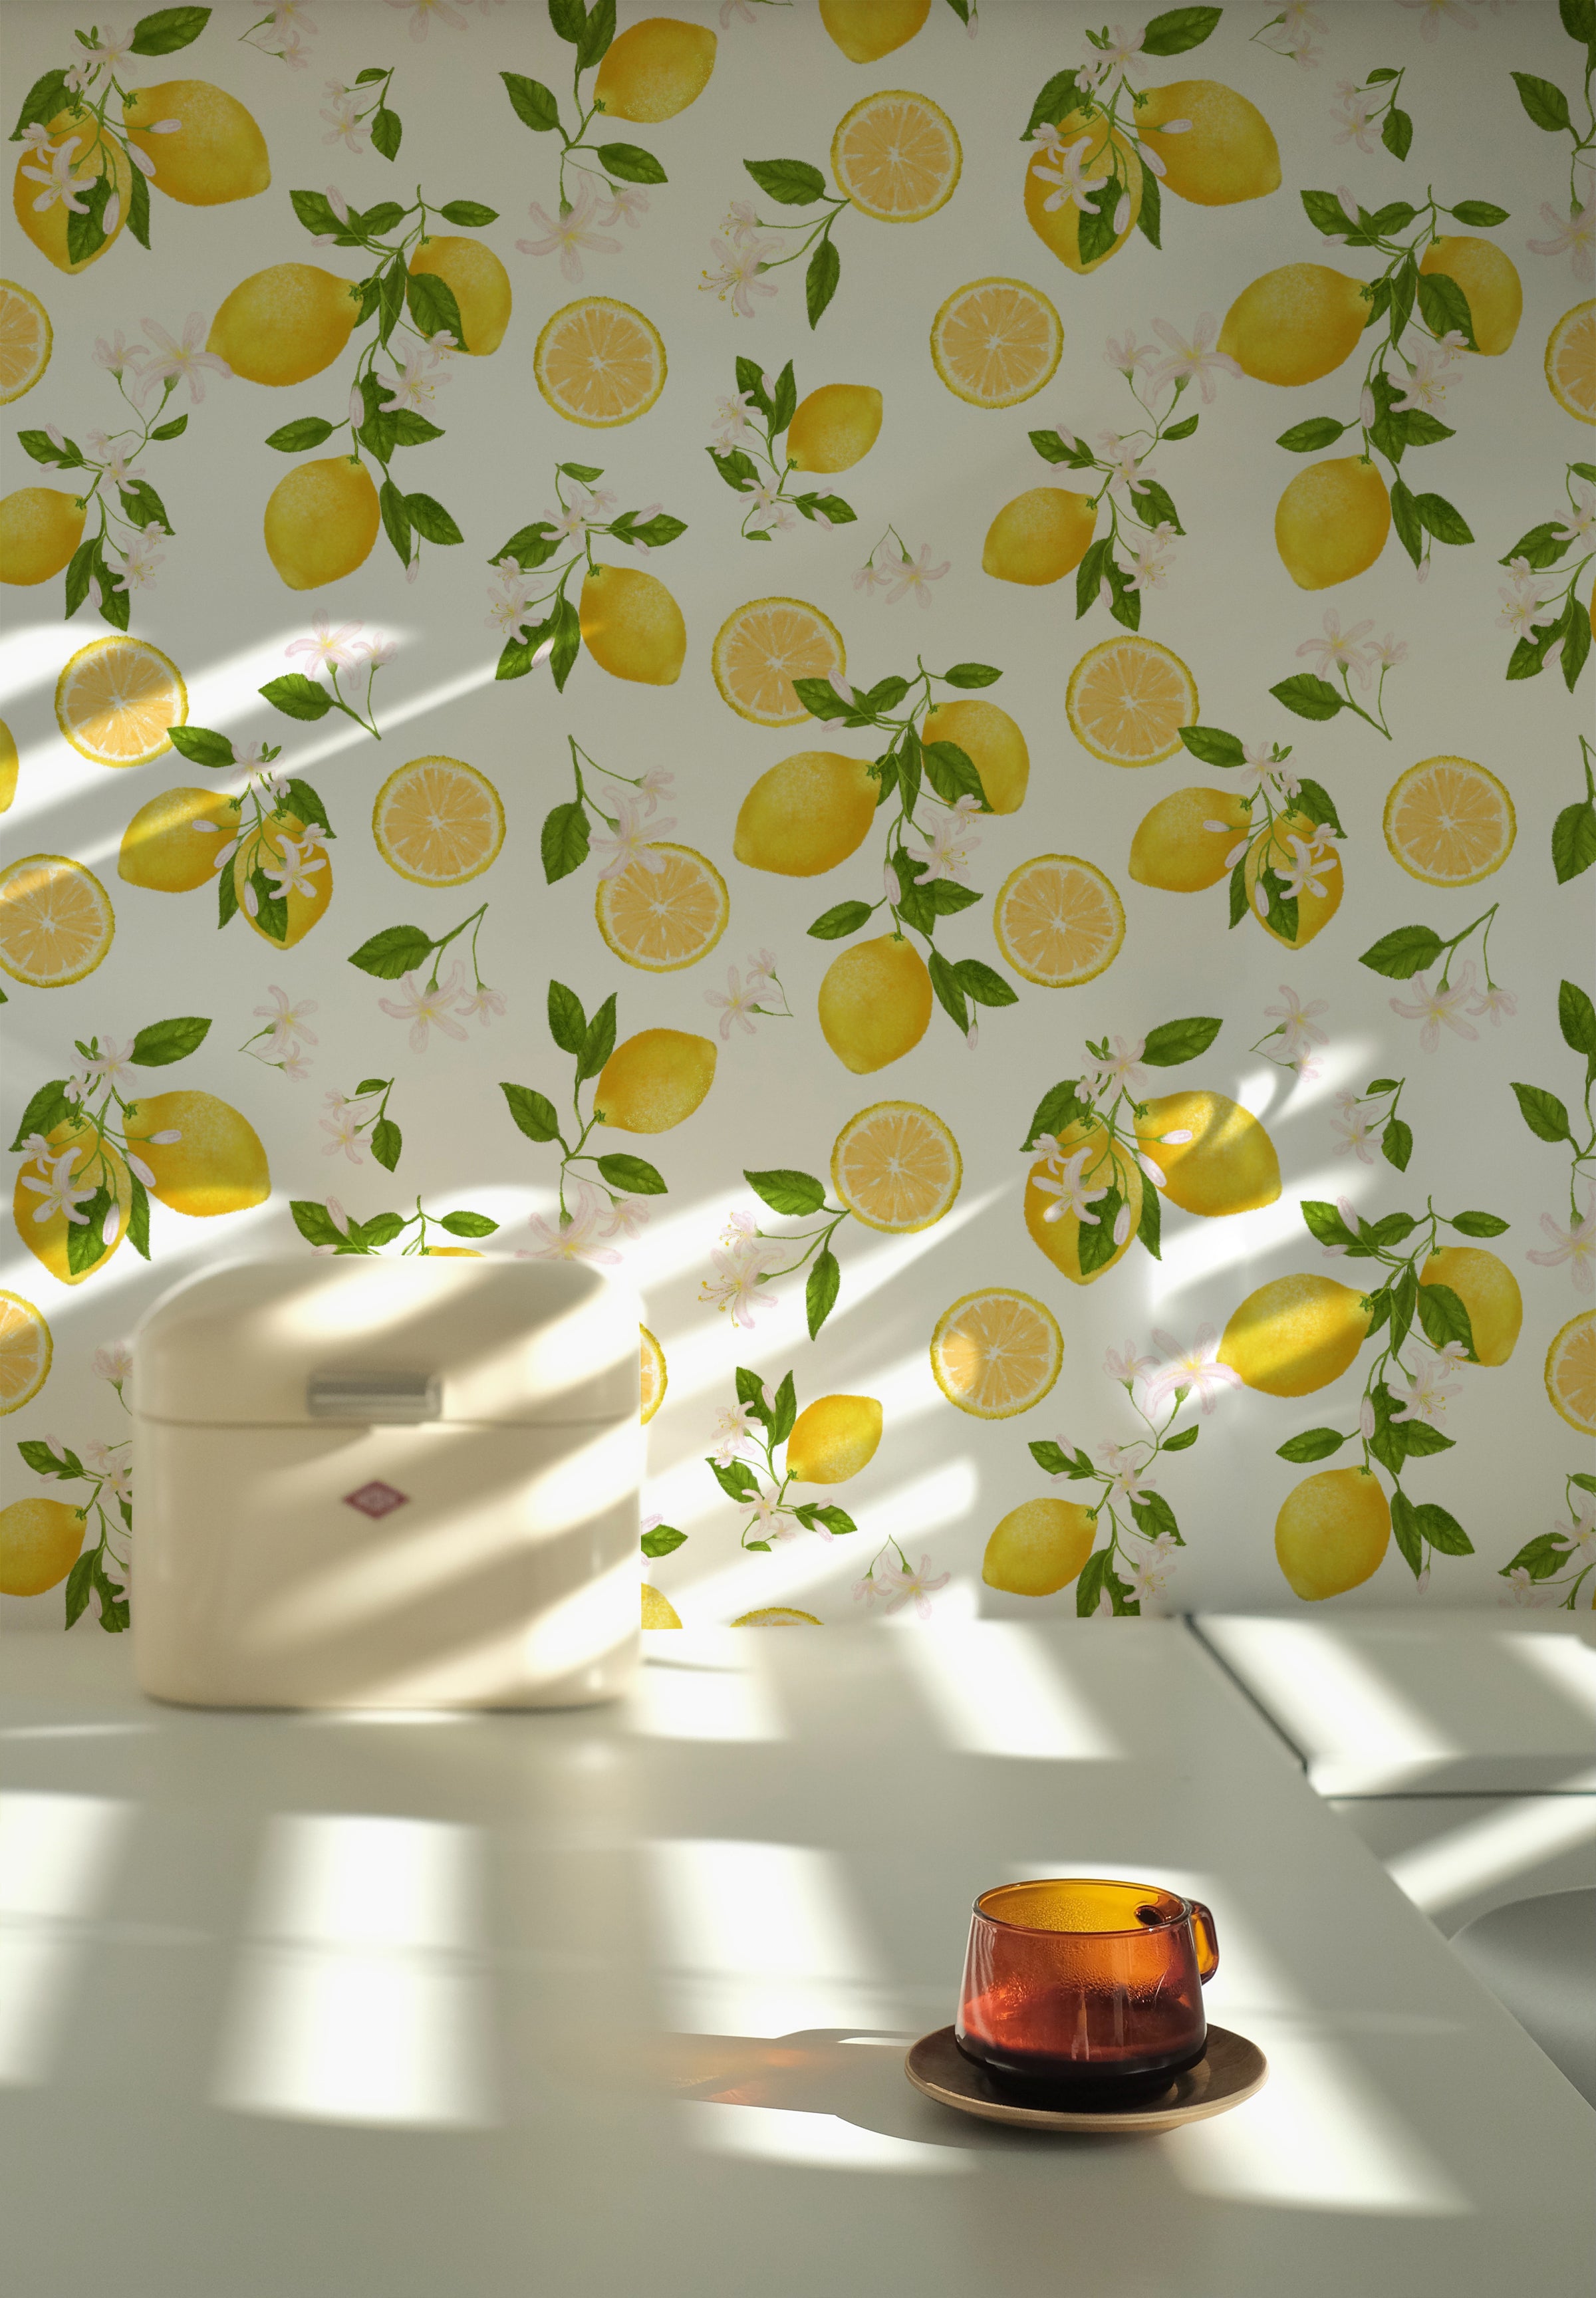 Lemon Floral Wallpaper with a bright and fresh pattern of yellow lemons, green leaves, and white flowers, creating a sunny and vibrant look in a kitchen setting